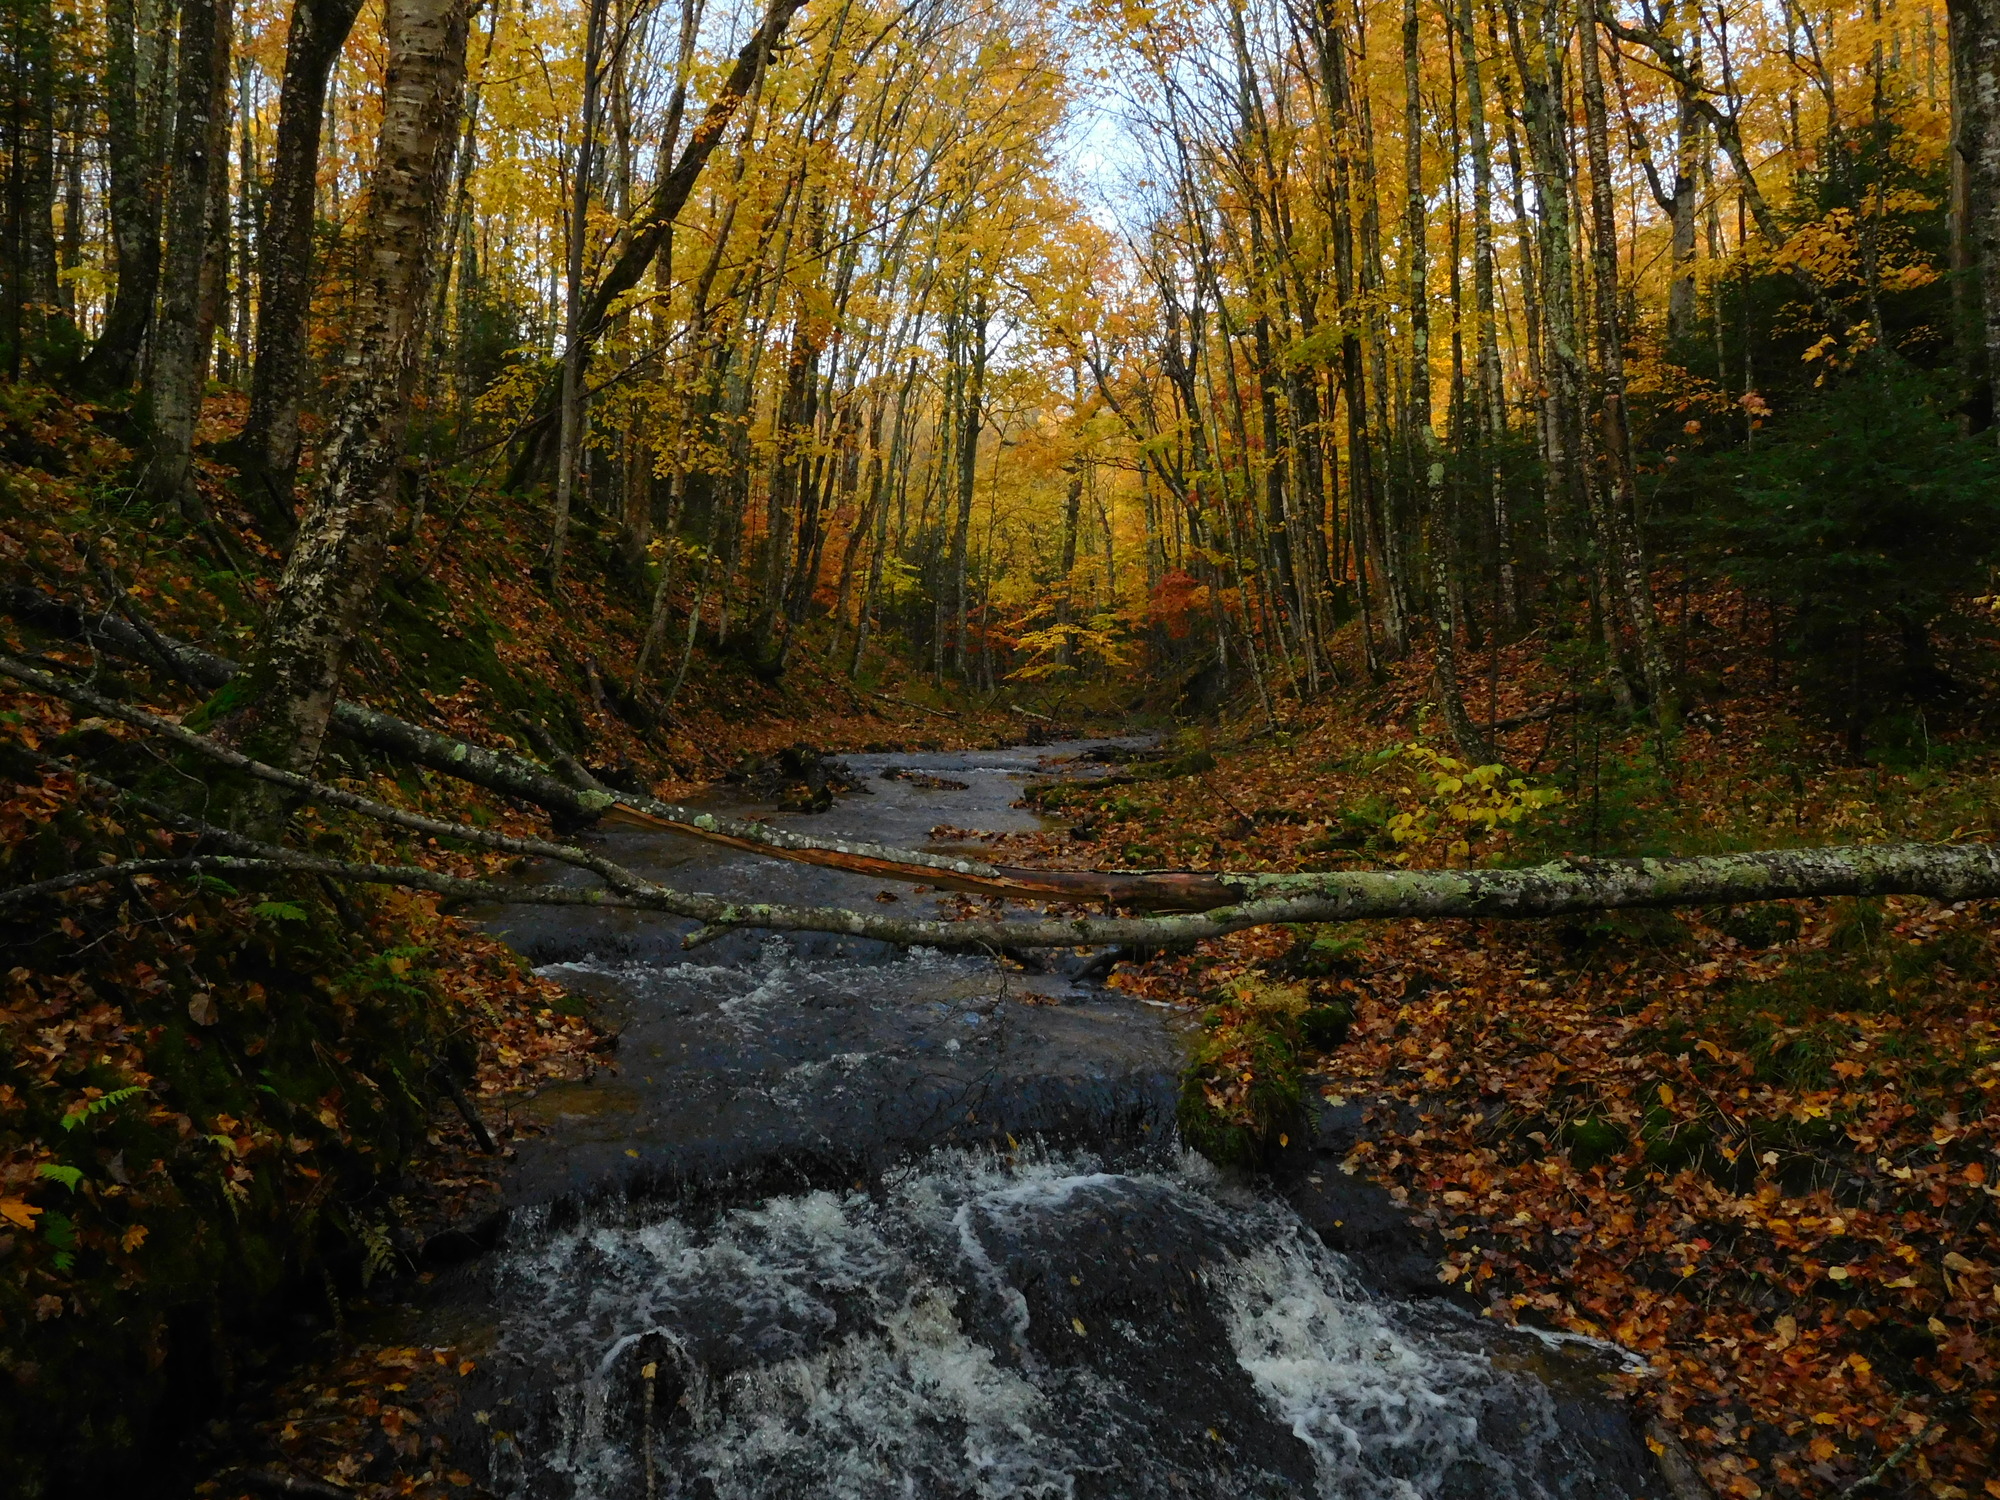 Mosquito Creek and small cascading waterfall flowing through the woods. The banks are covered in fall leaves. The trees have yellow leaves.